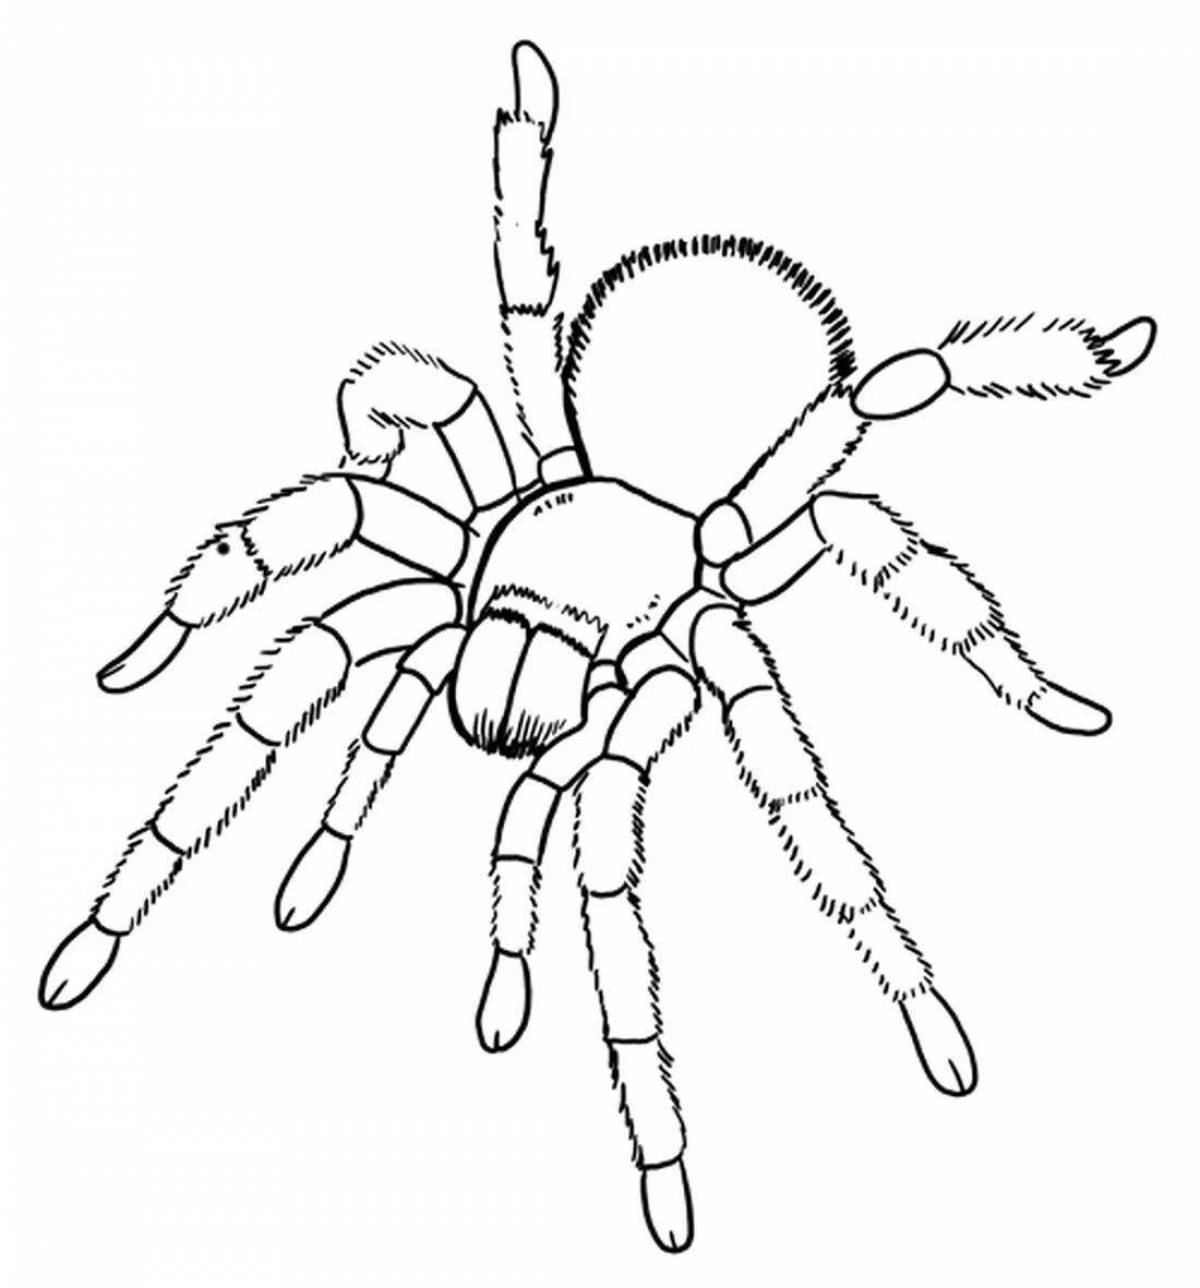 Tarantula spider detailed coloring page